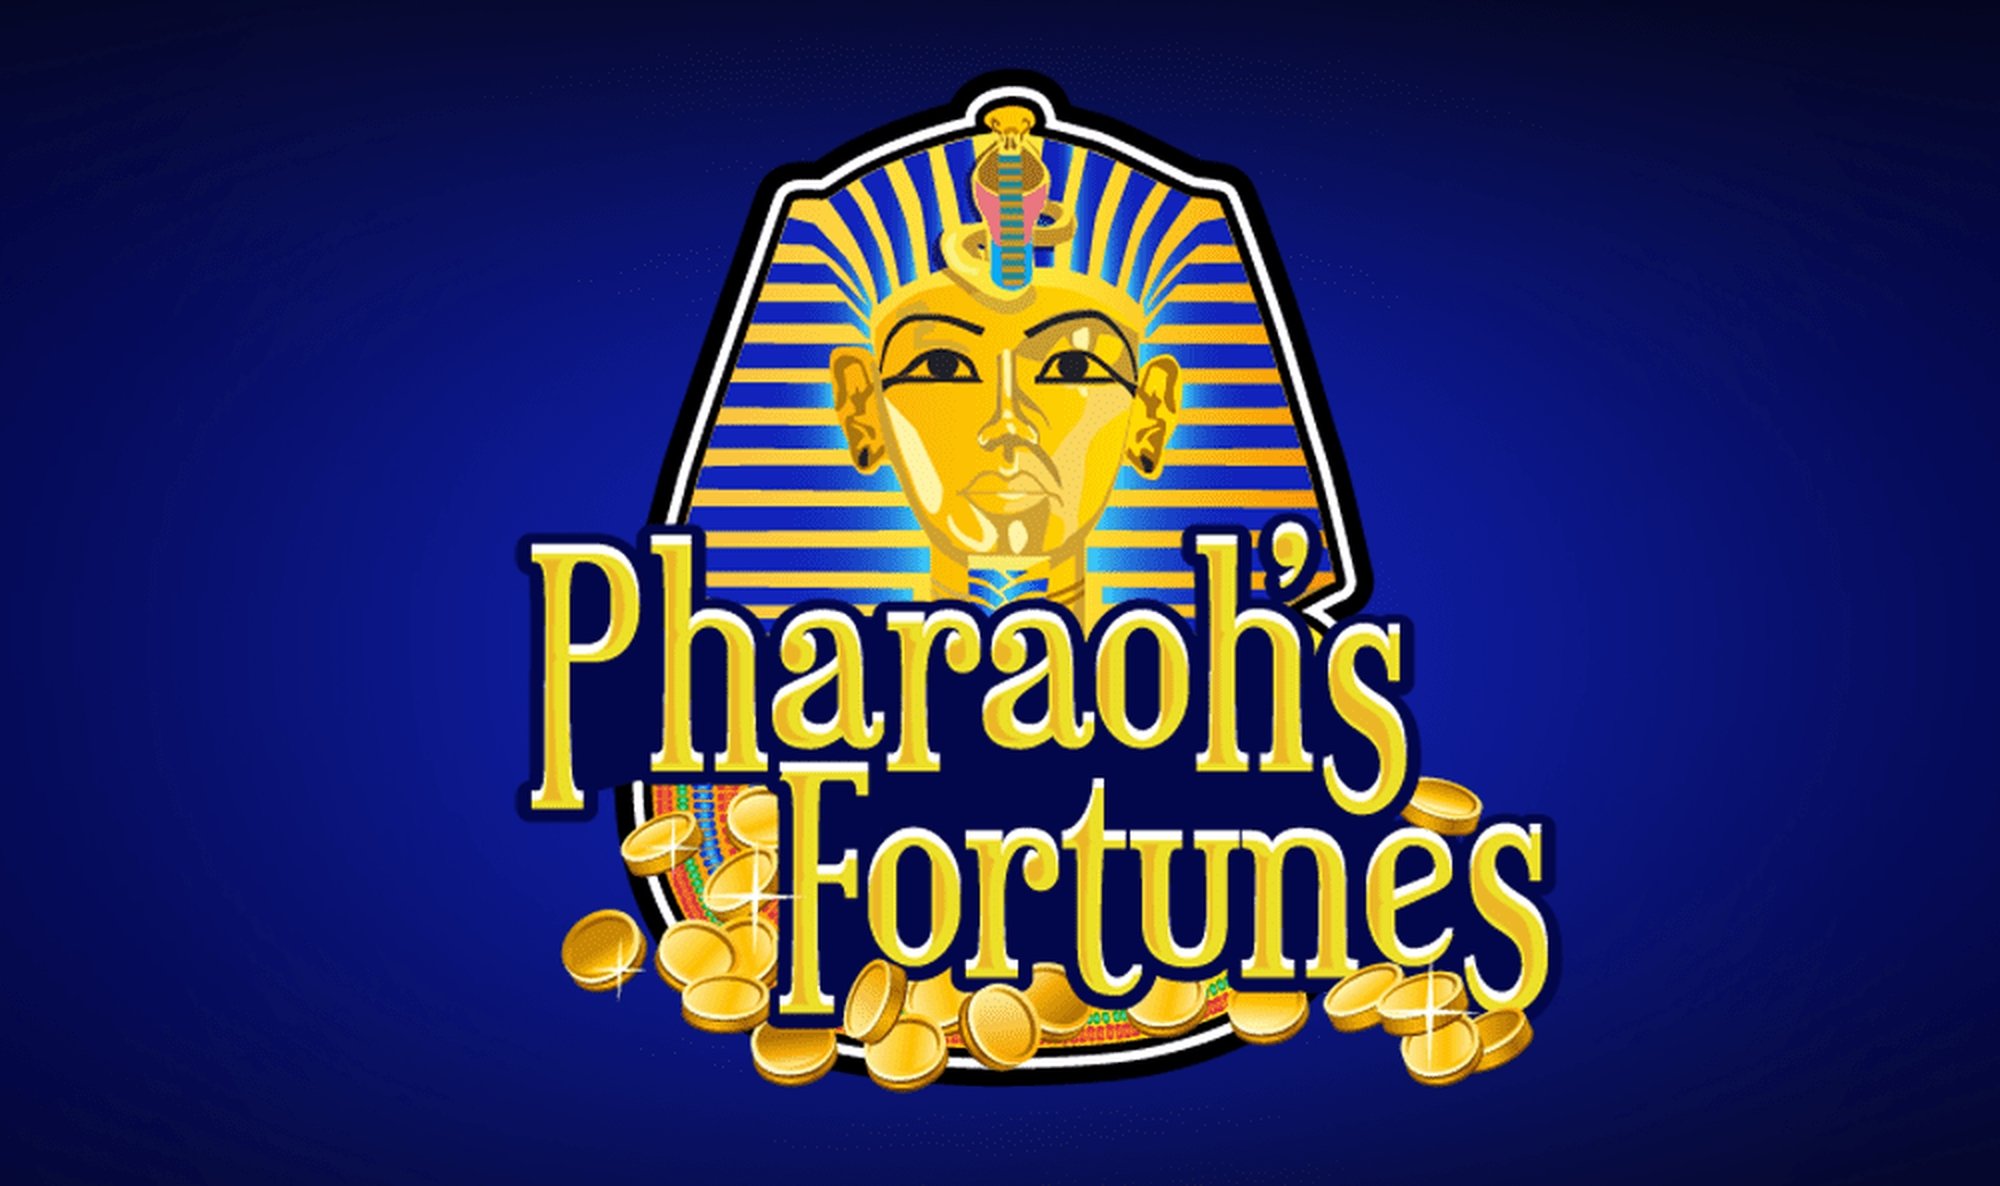 The Pharaoh Fortune Online Slot Demo Game by Gamescale Software